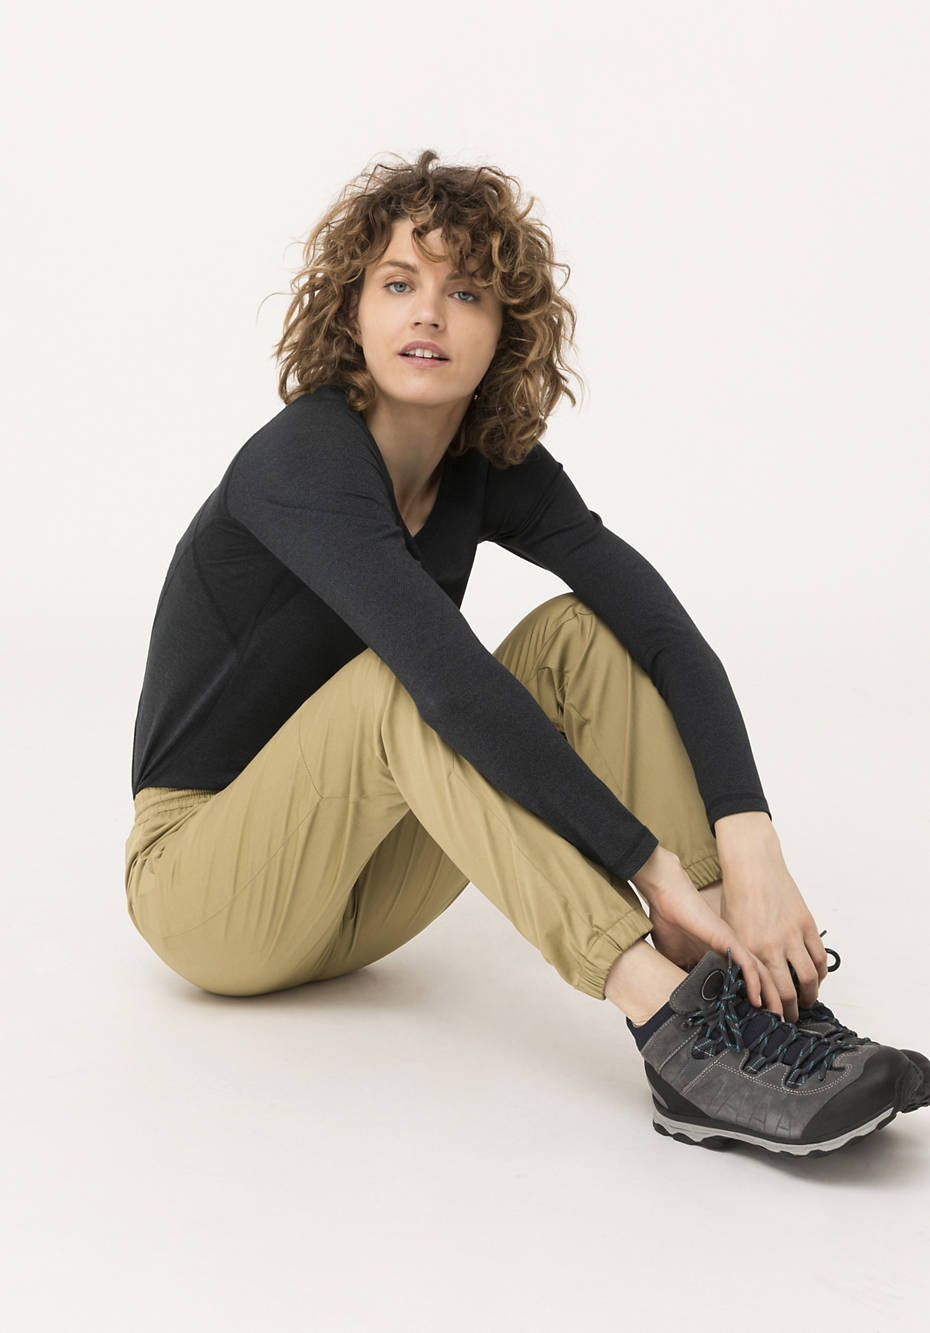 Outdoor jogging pants made of organic cotton